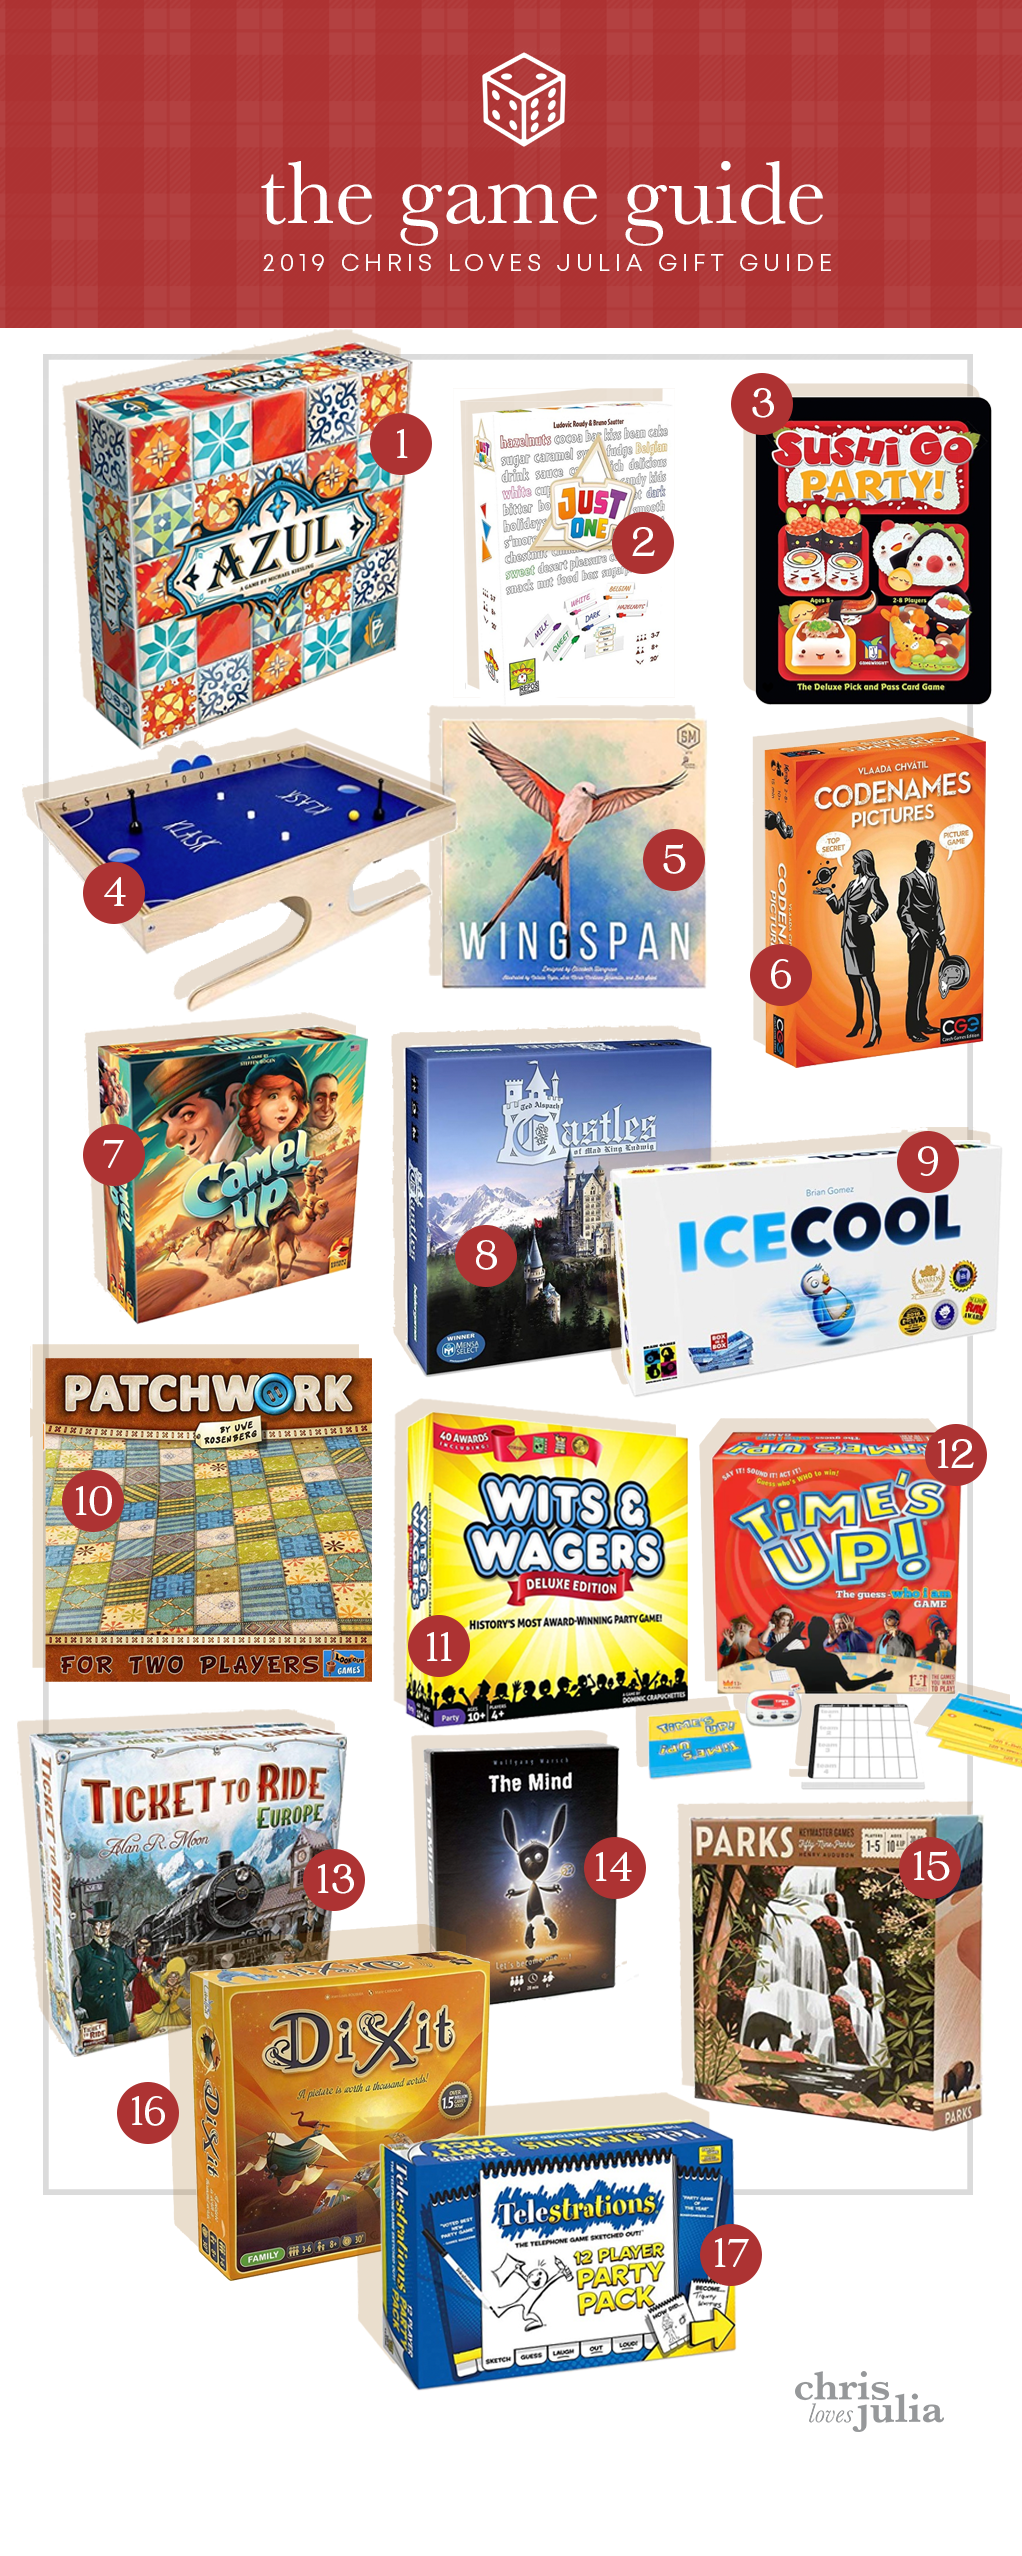 The Top 10 Board Games of All Time